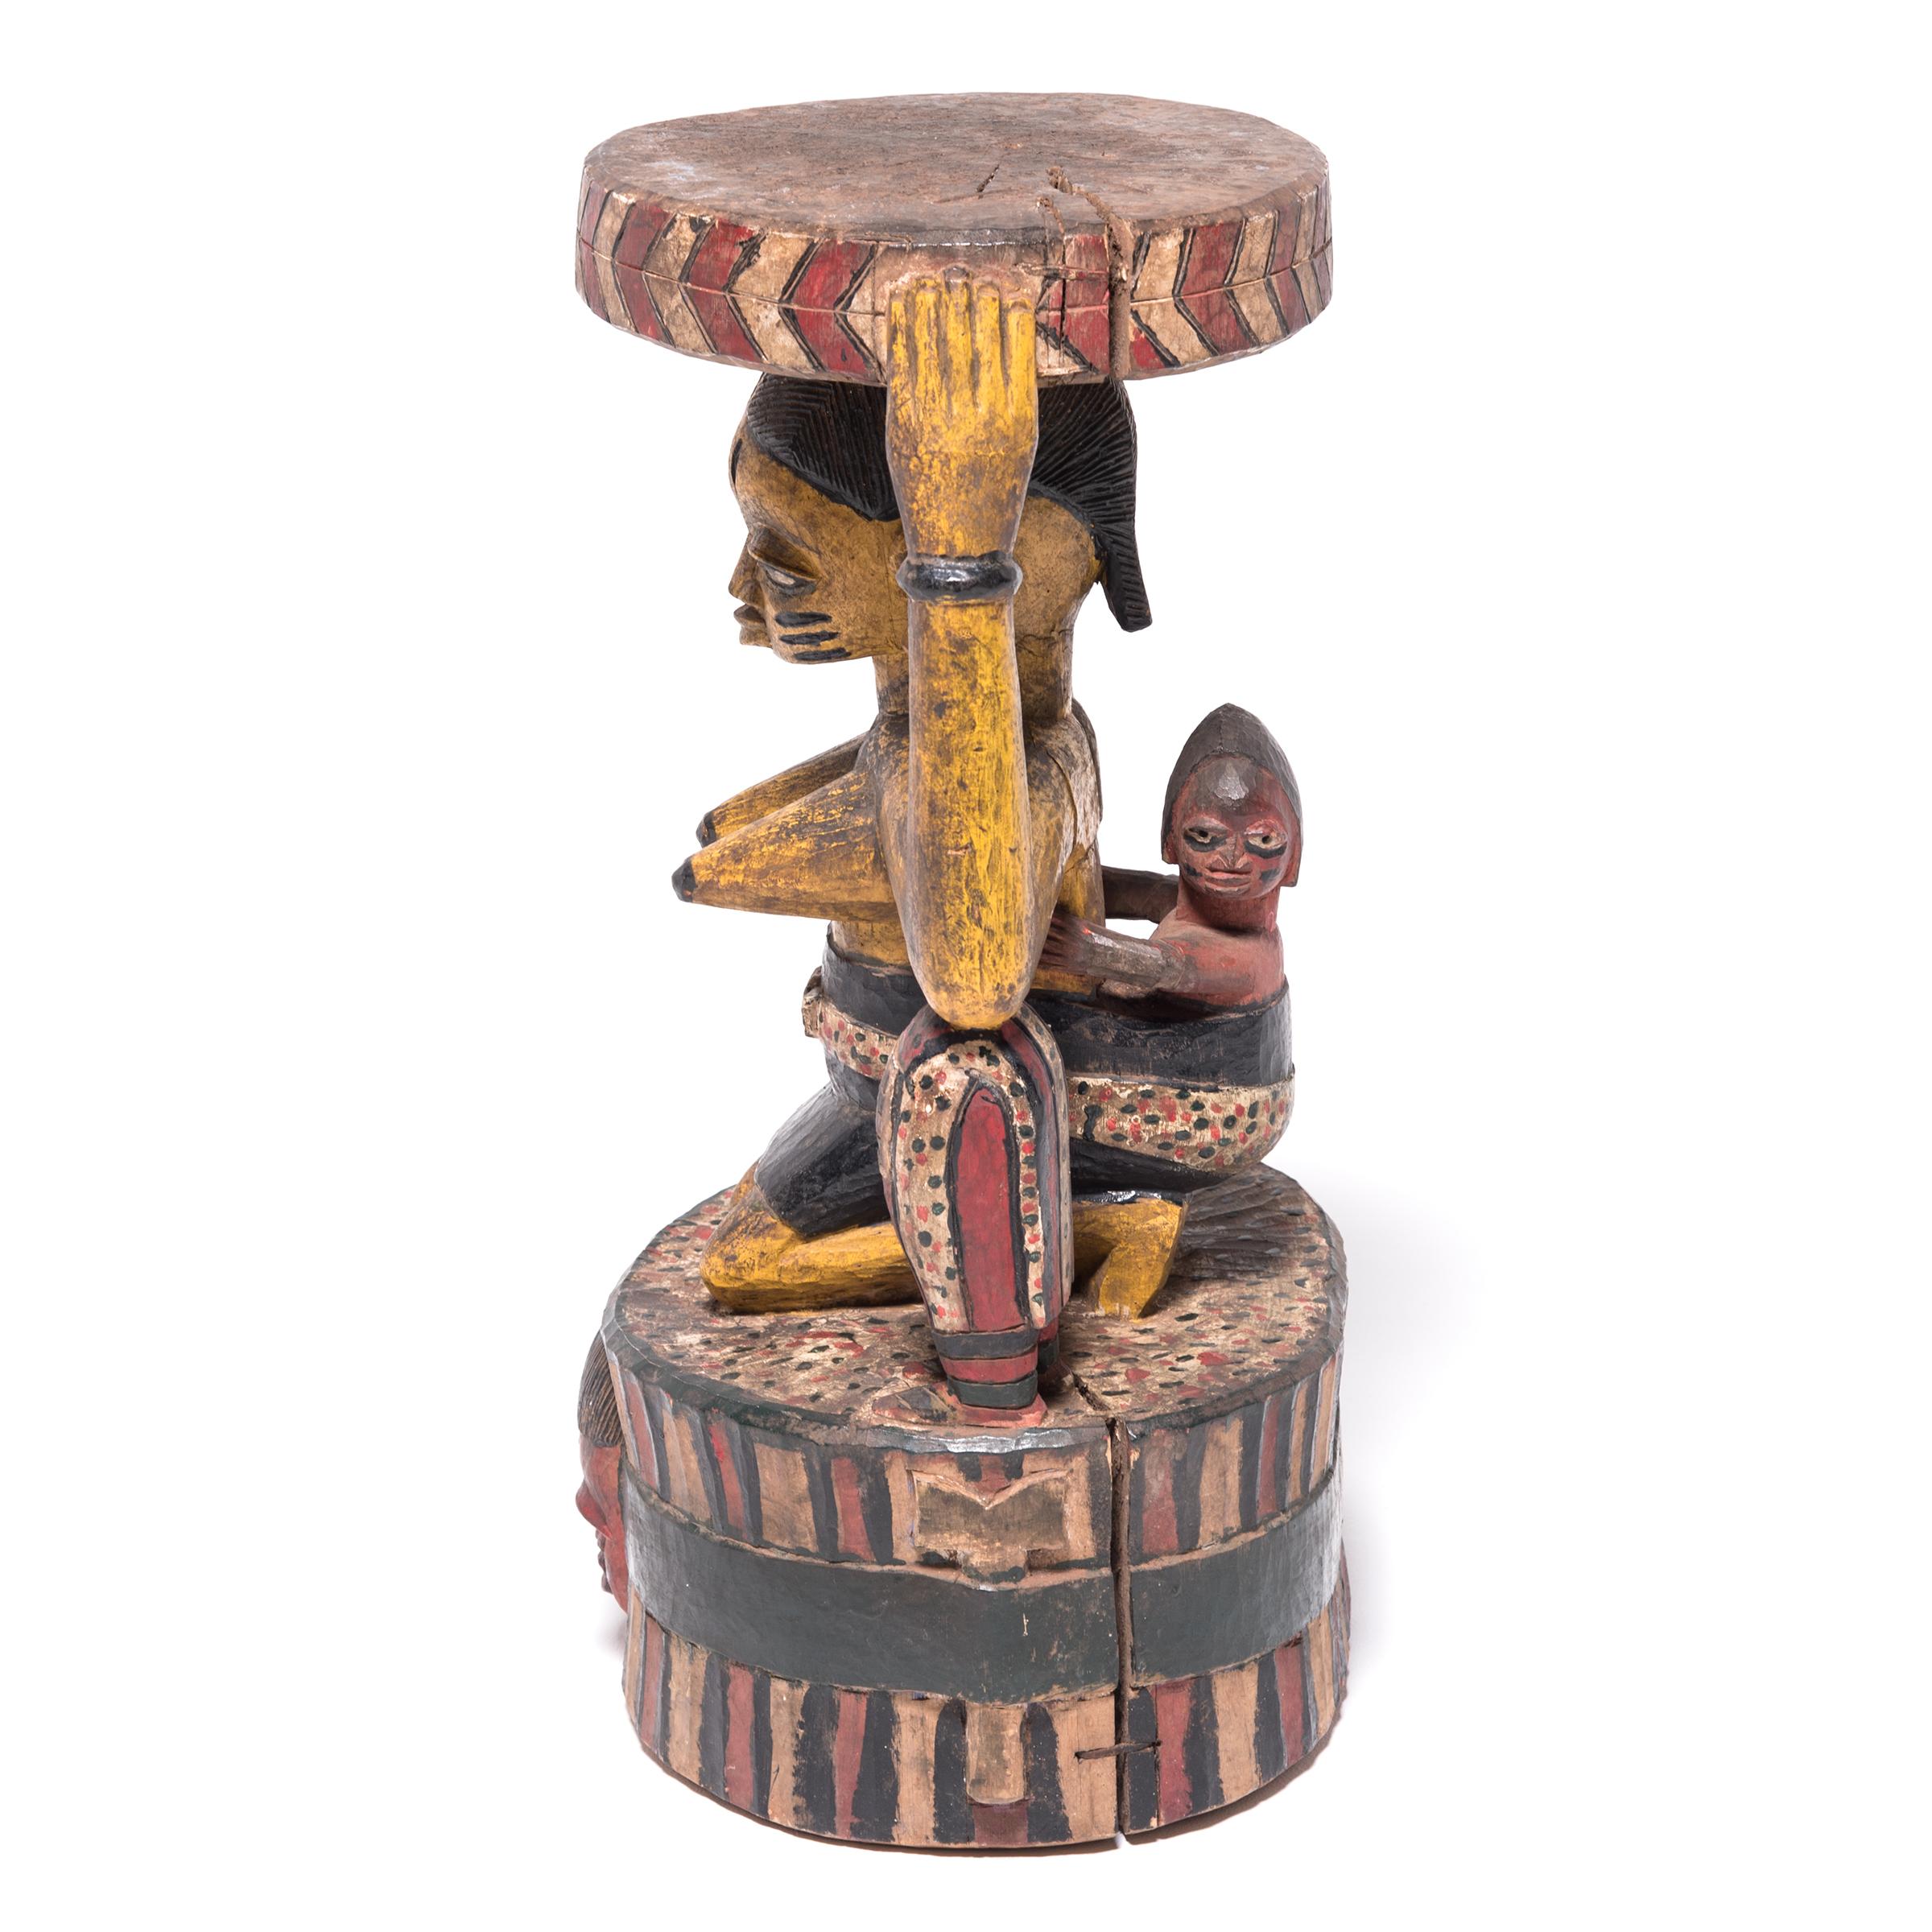 Carved in a classic Yoruba form, this figurative stool is unusual for its highly patterned painted surface. Using traditional techniques, a single tree trunk was carved into a column, then taken in further until the form of a kneeling woman